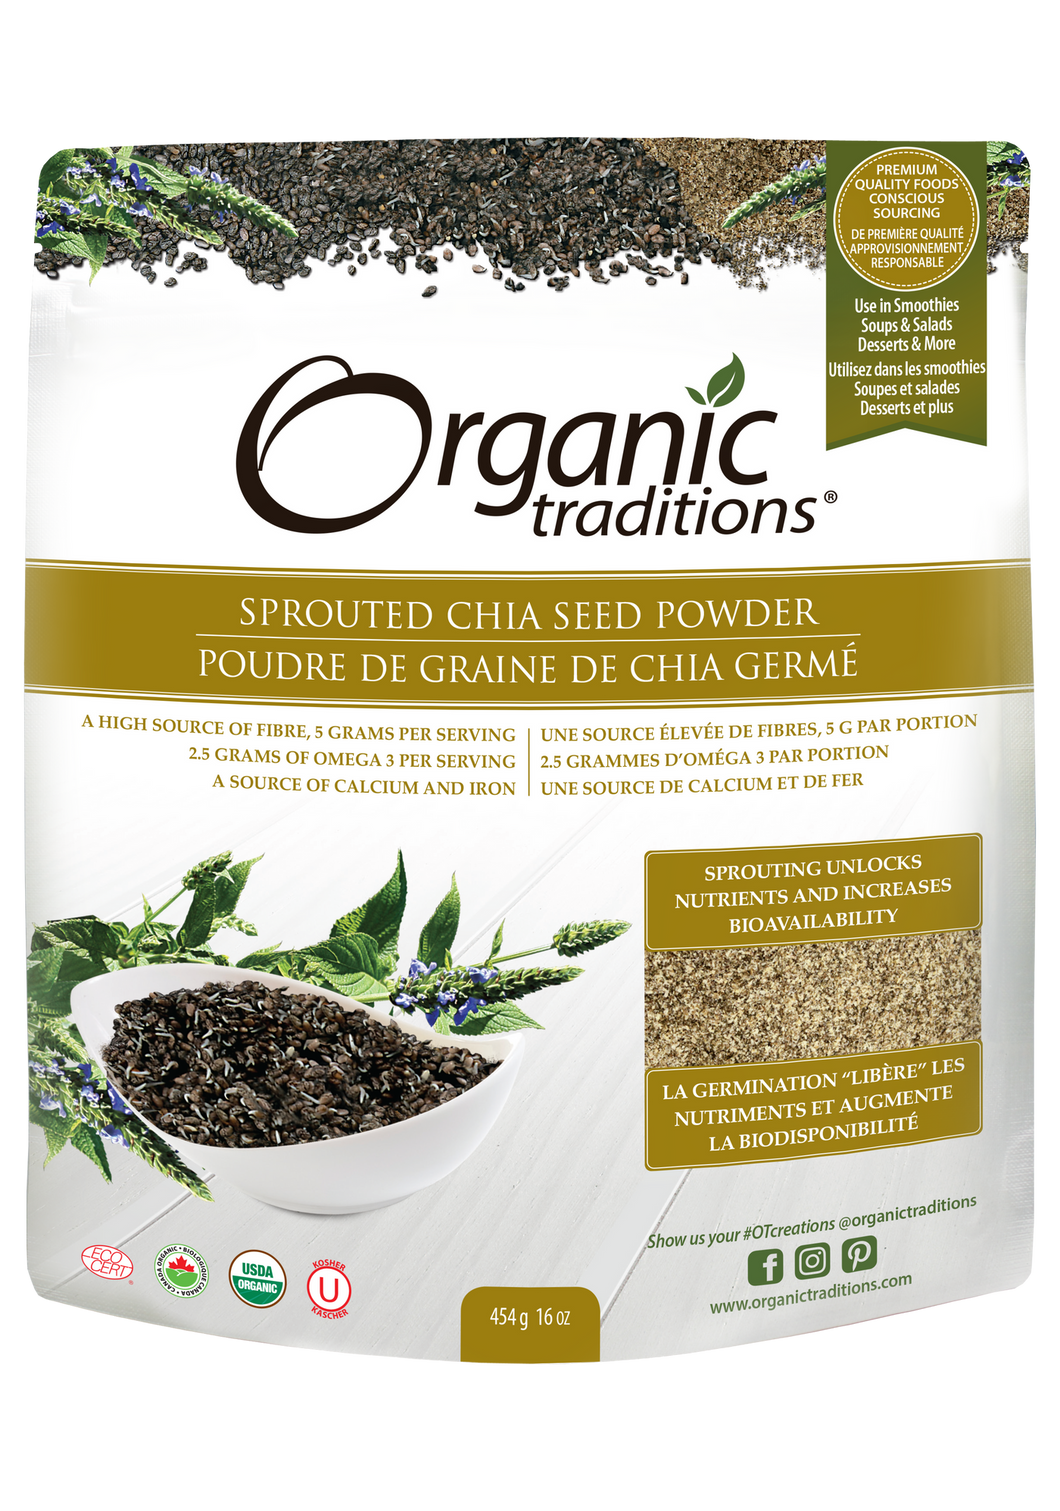 Organic Traditions Sprouted Chia Seed Powder (454g)